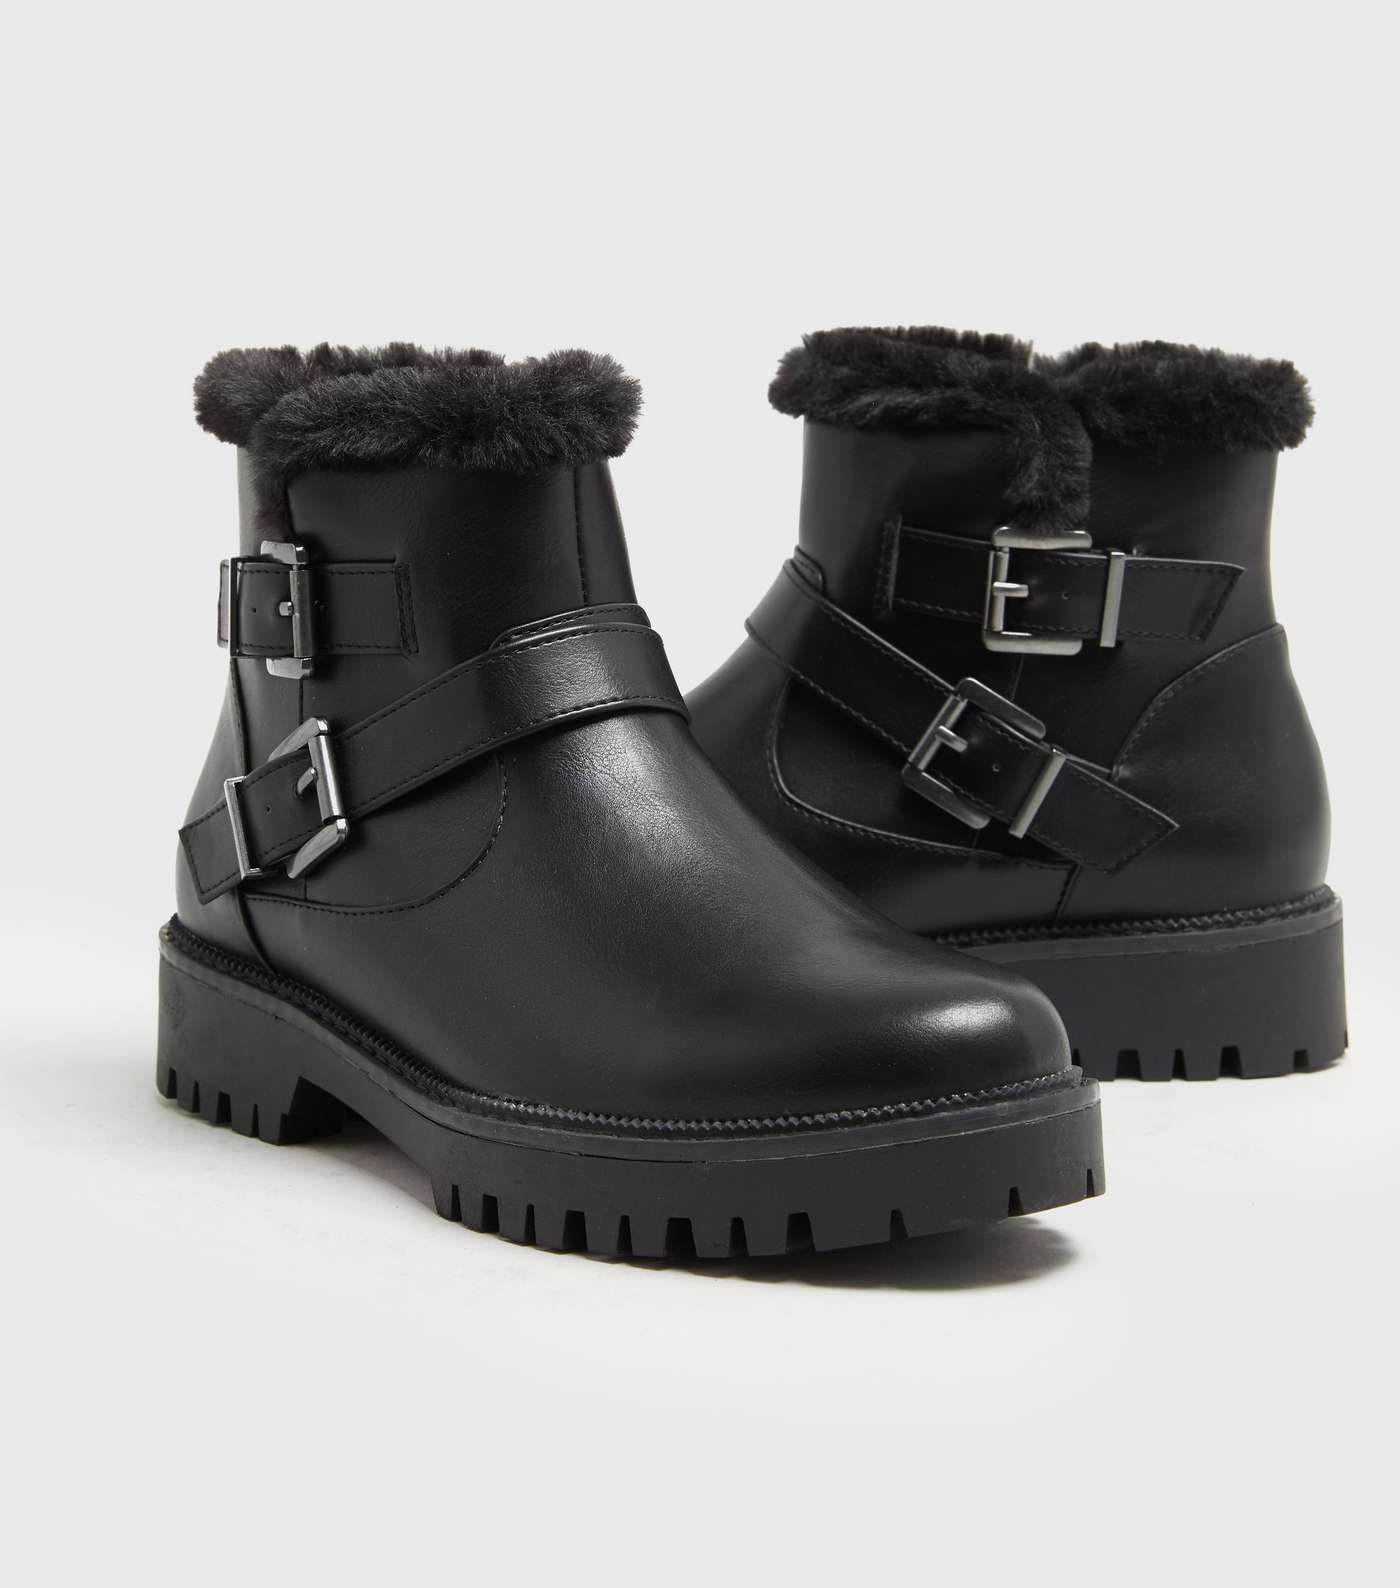 Girls Black Faux Fur Lined Chunky Biker Boots Image 2